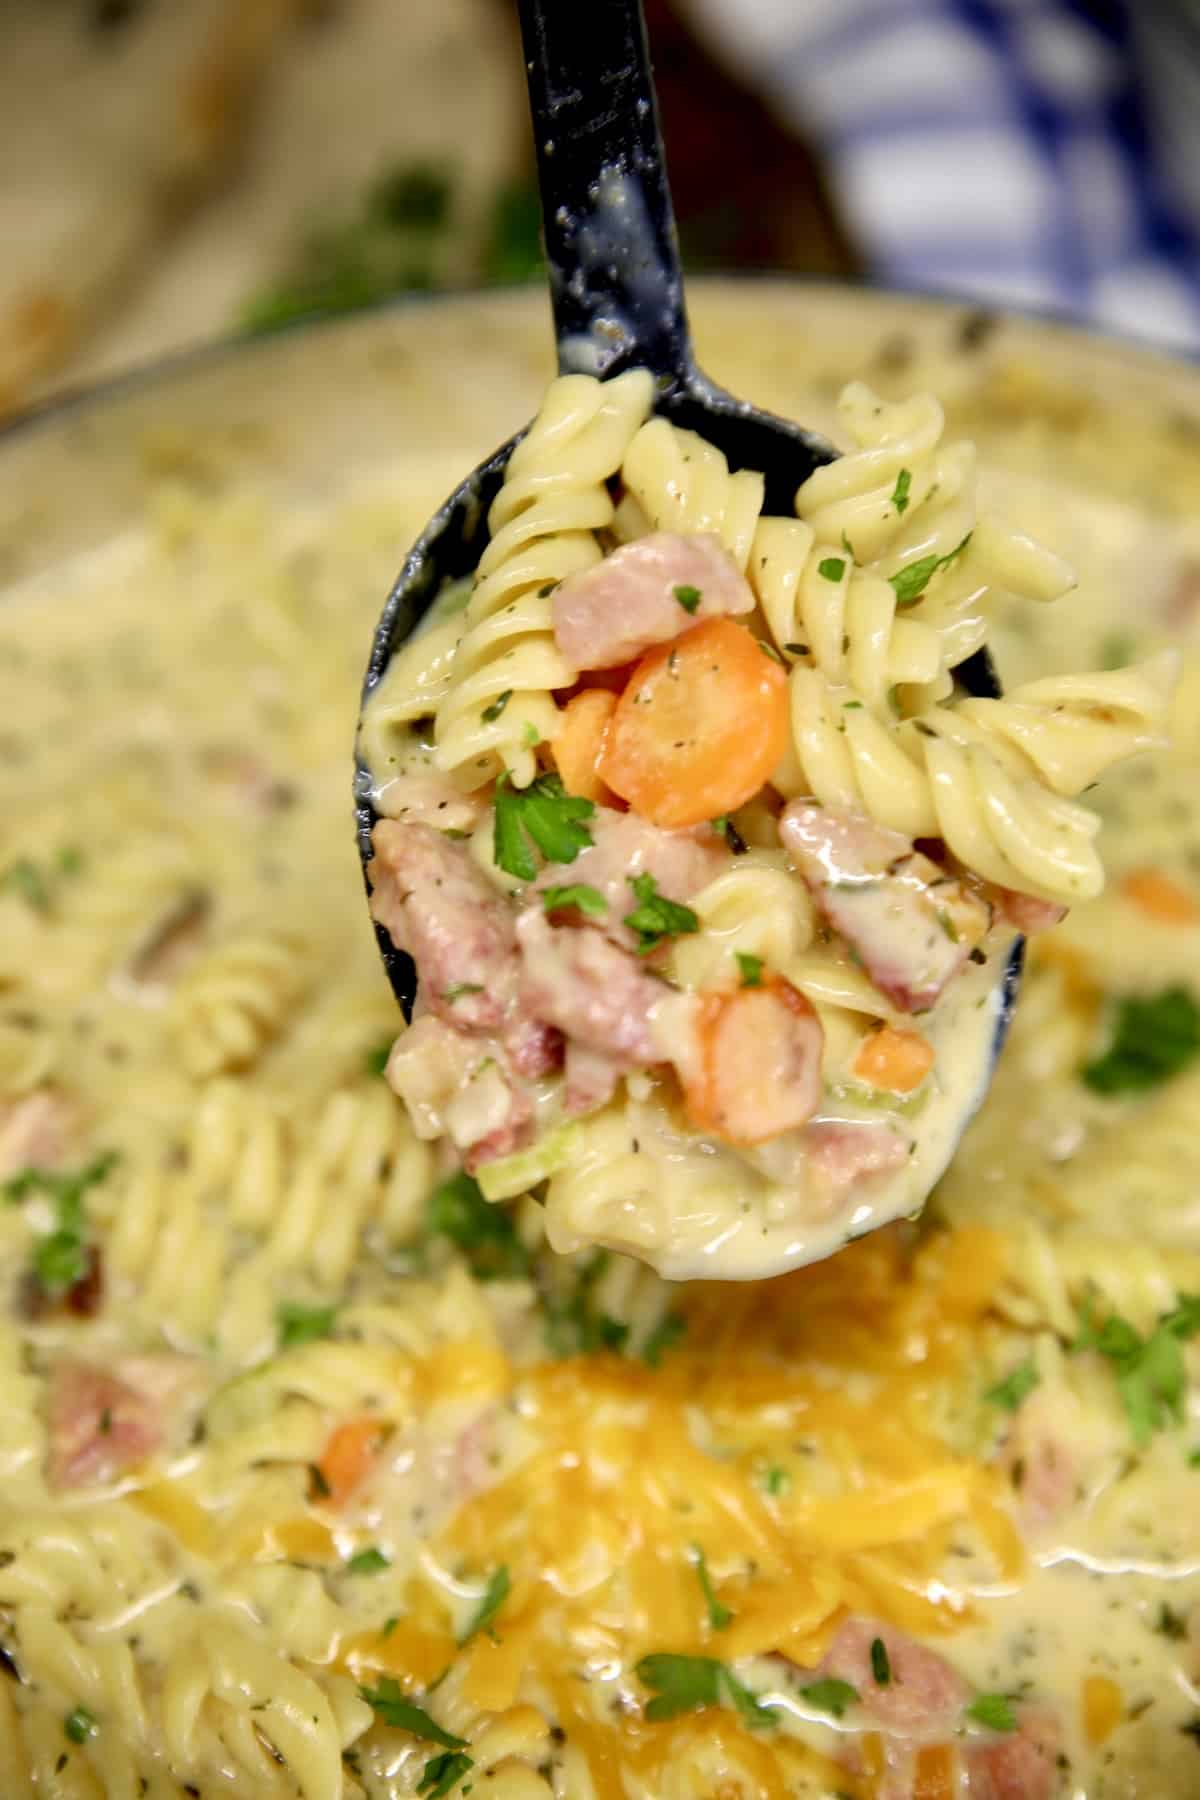 Spoonful of ham soup with pasta and vegetables.